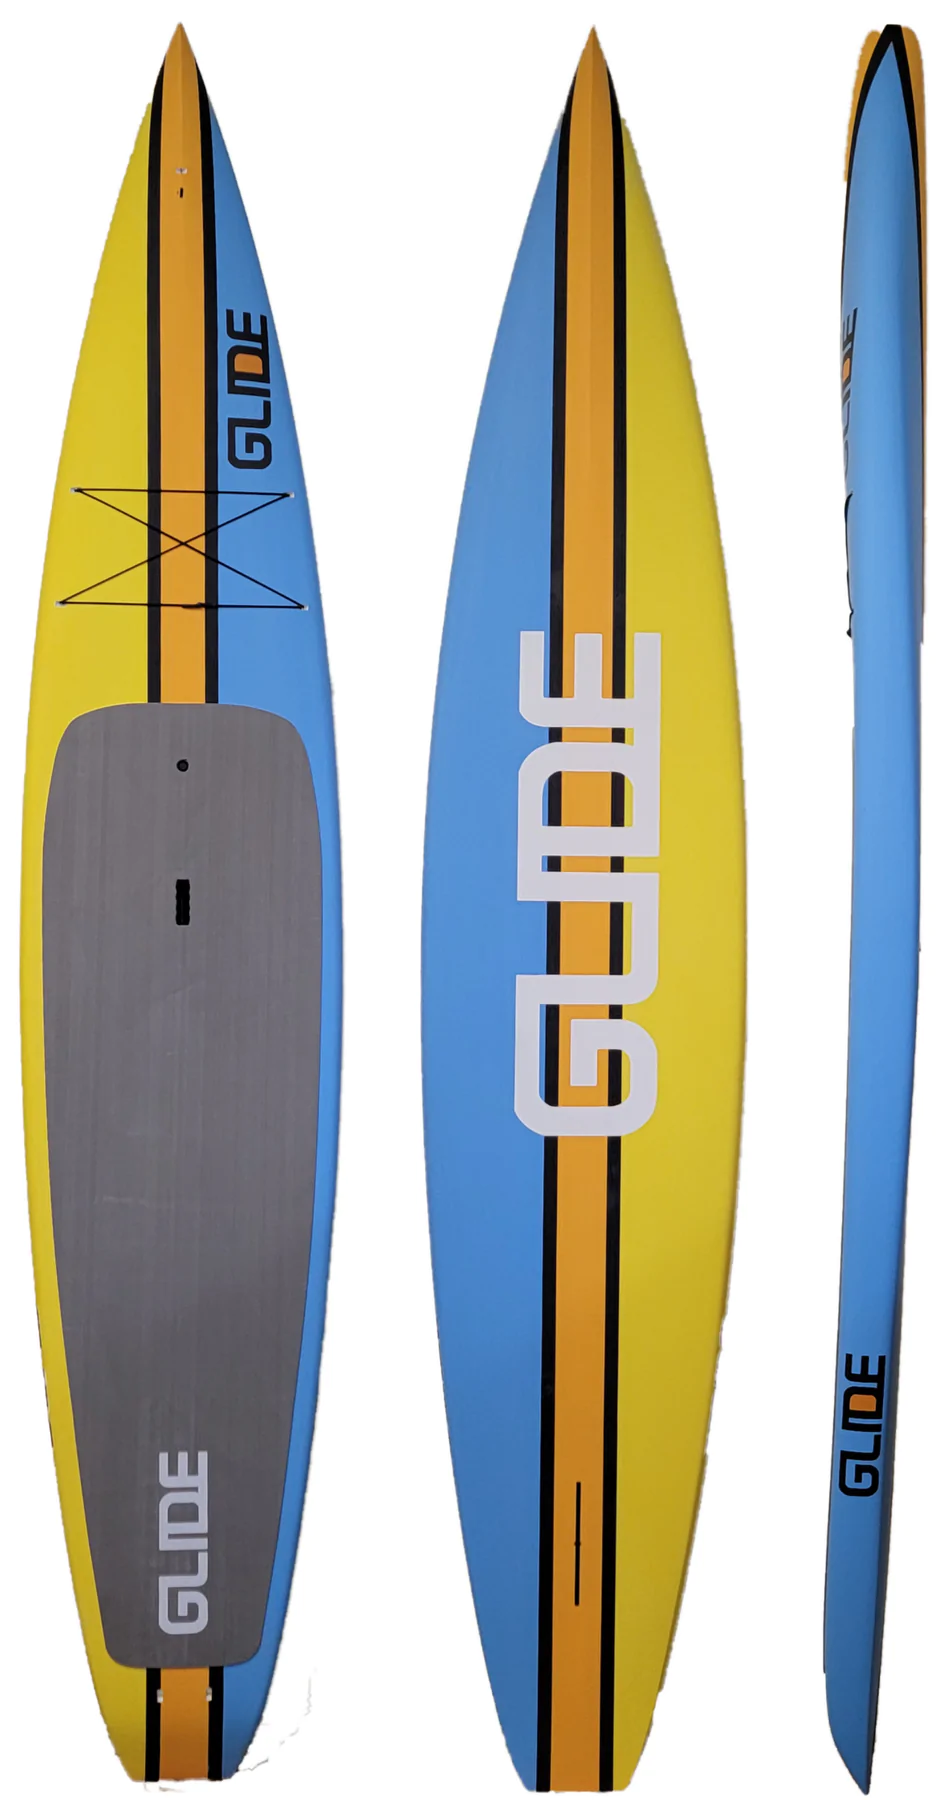 Paddle boarding the Glide Godspeed MK. II racing paddle board with removable race center fin.